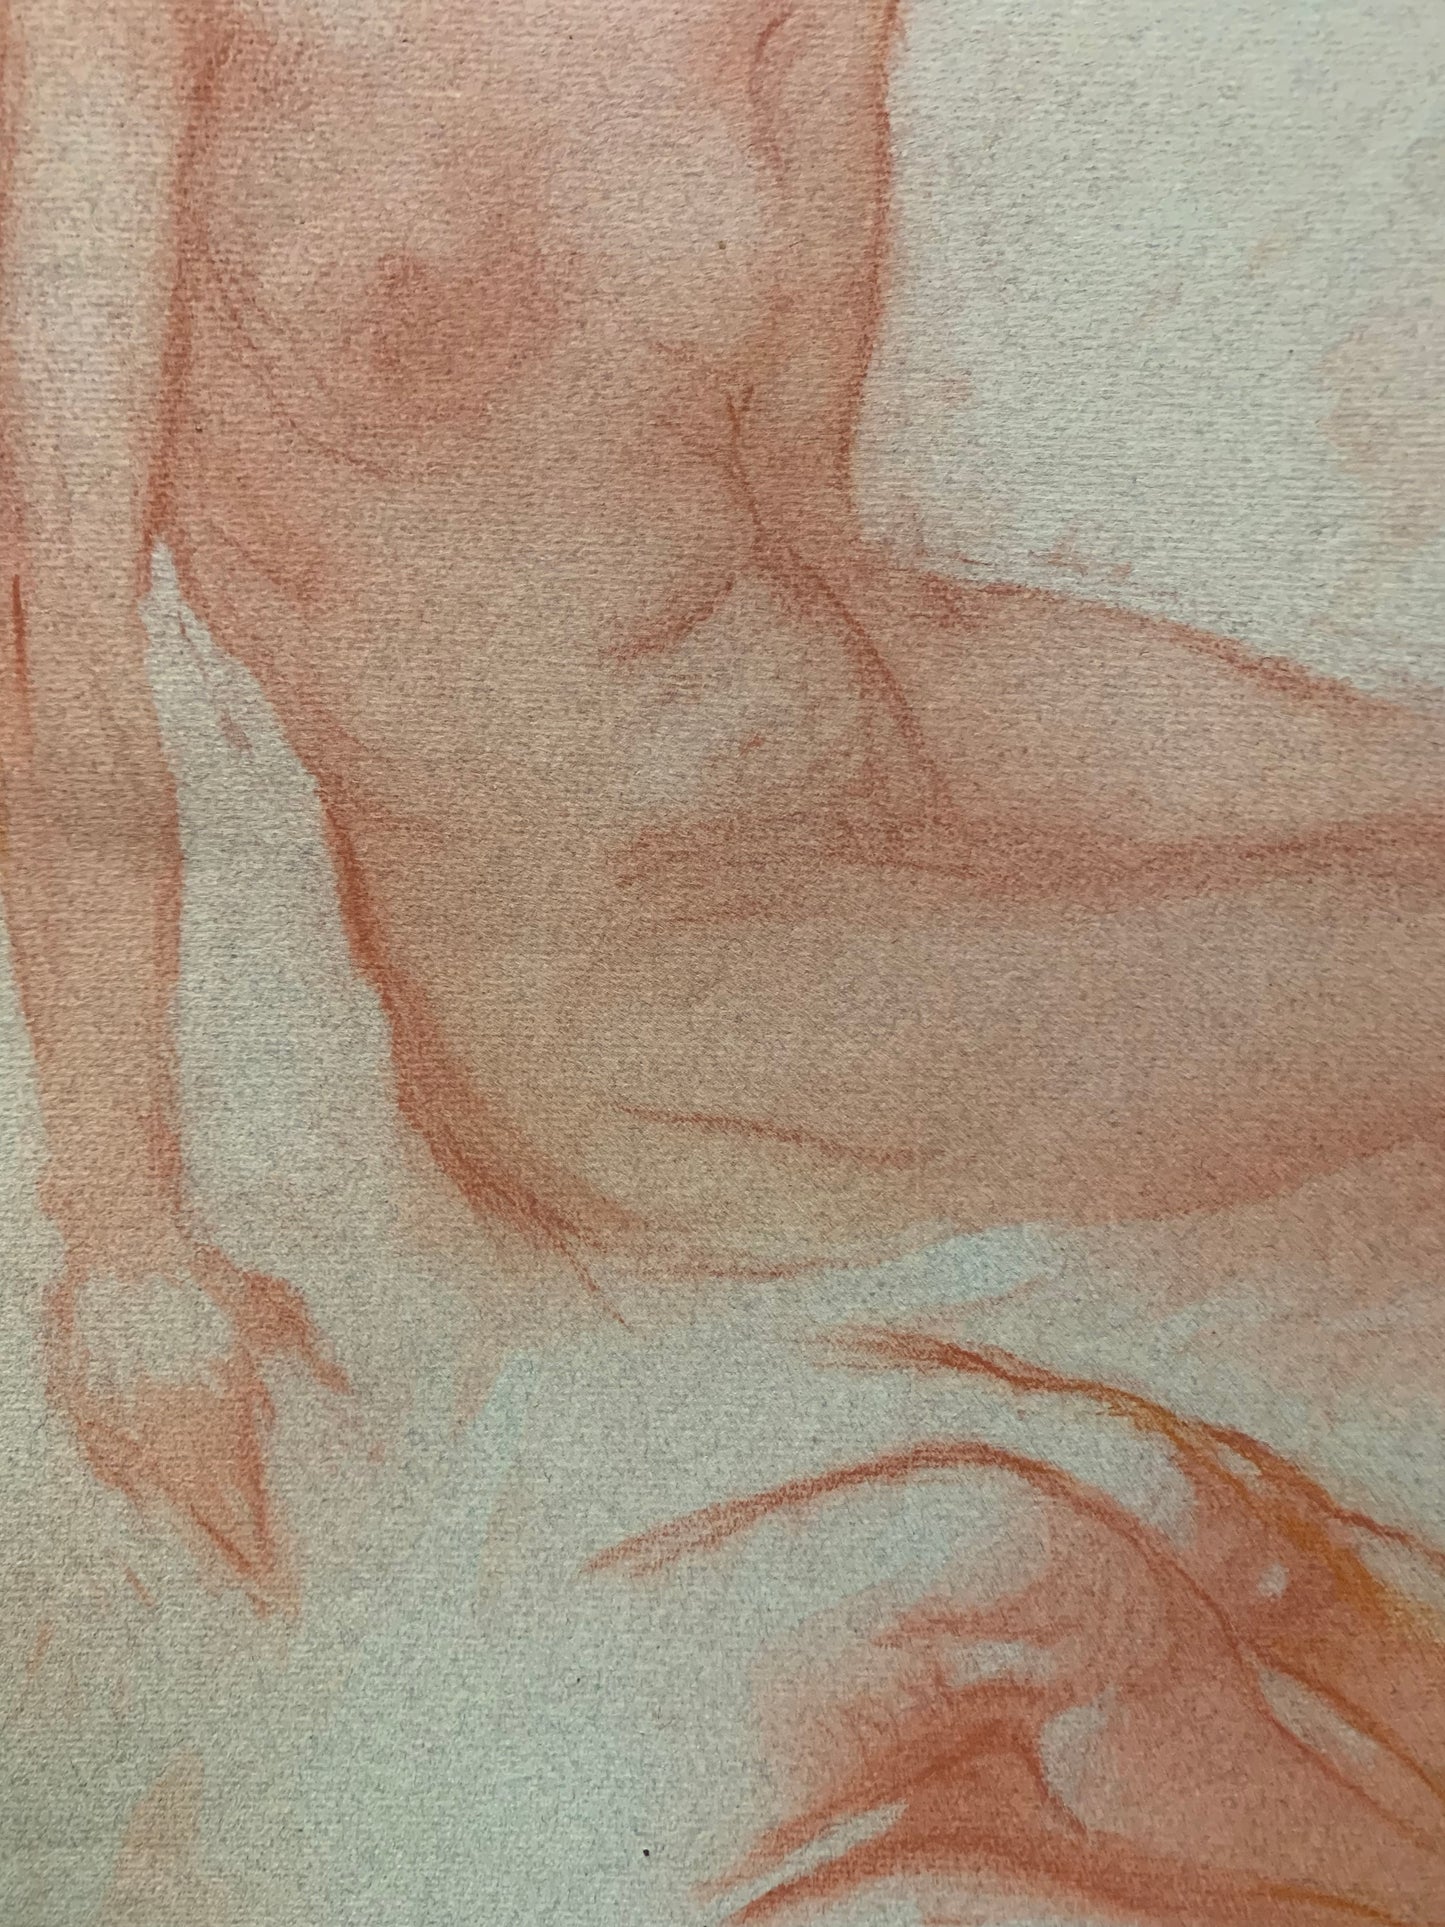 Study Of A Female Nude Figure. Sanguine Drawing On Paper.